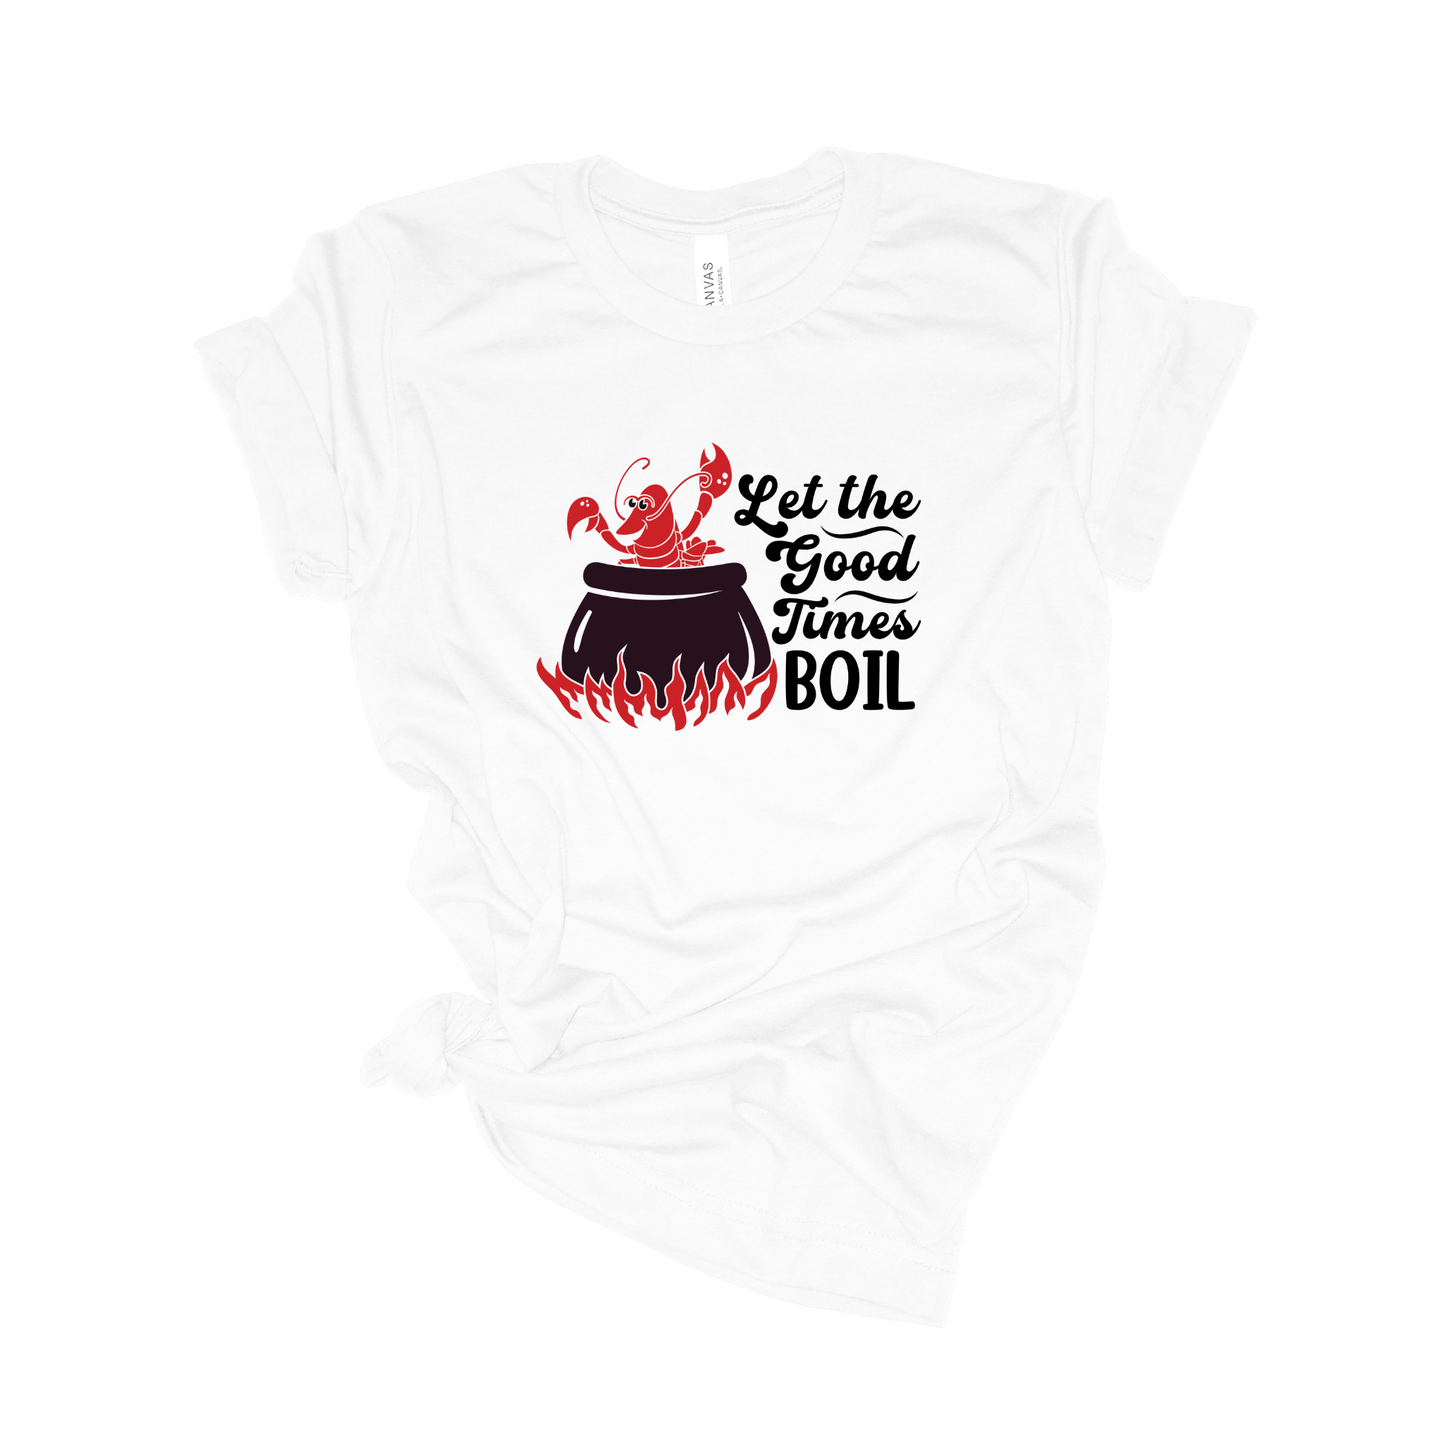 Let the Good Times BOIL - Crawfish Boil Tee - Unisex T-Shirt - White or Silver (Grey)